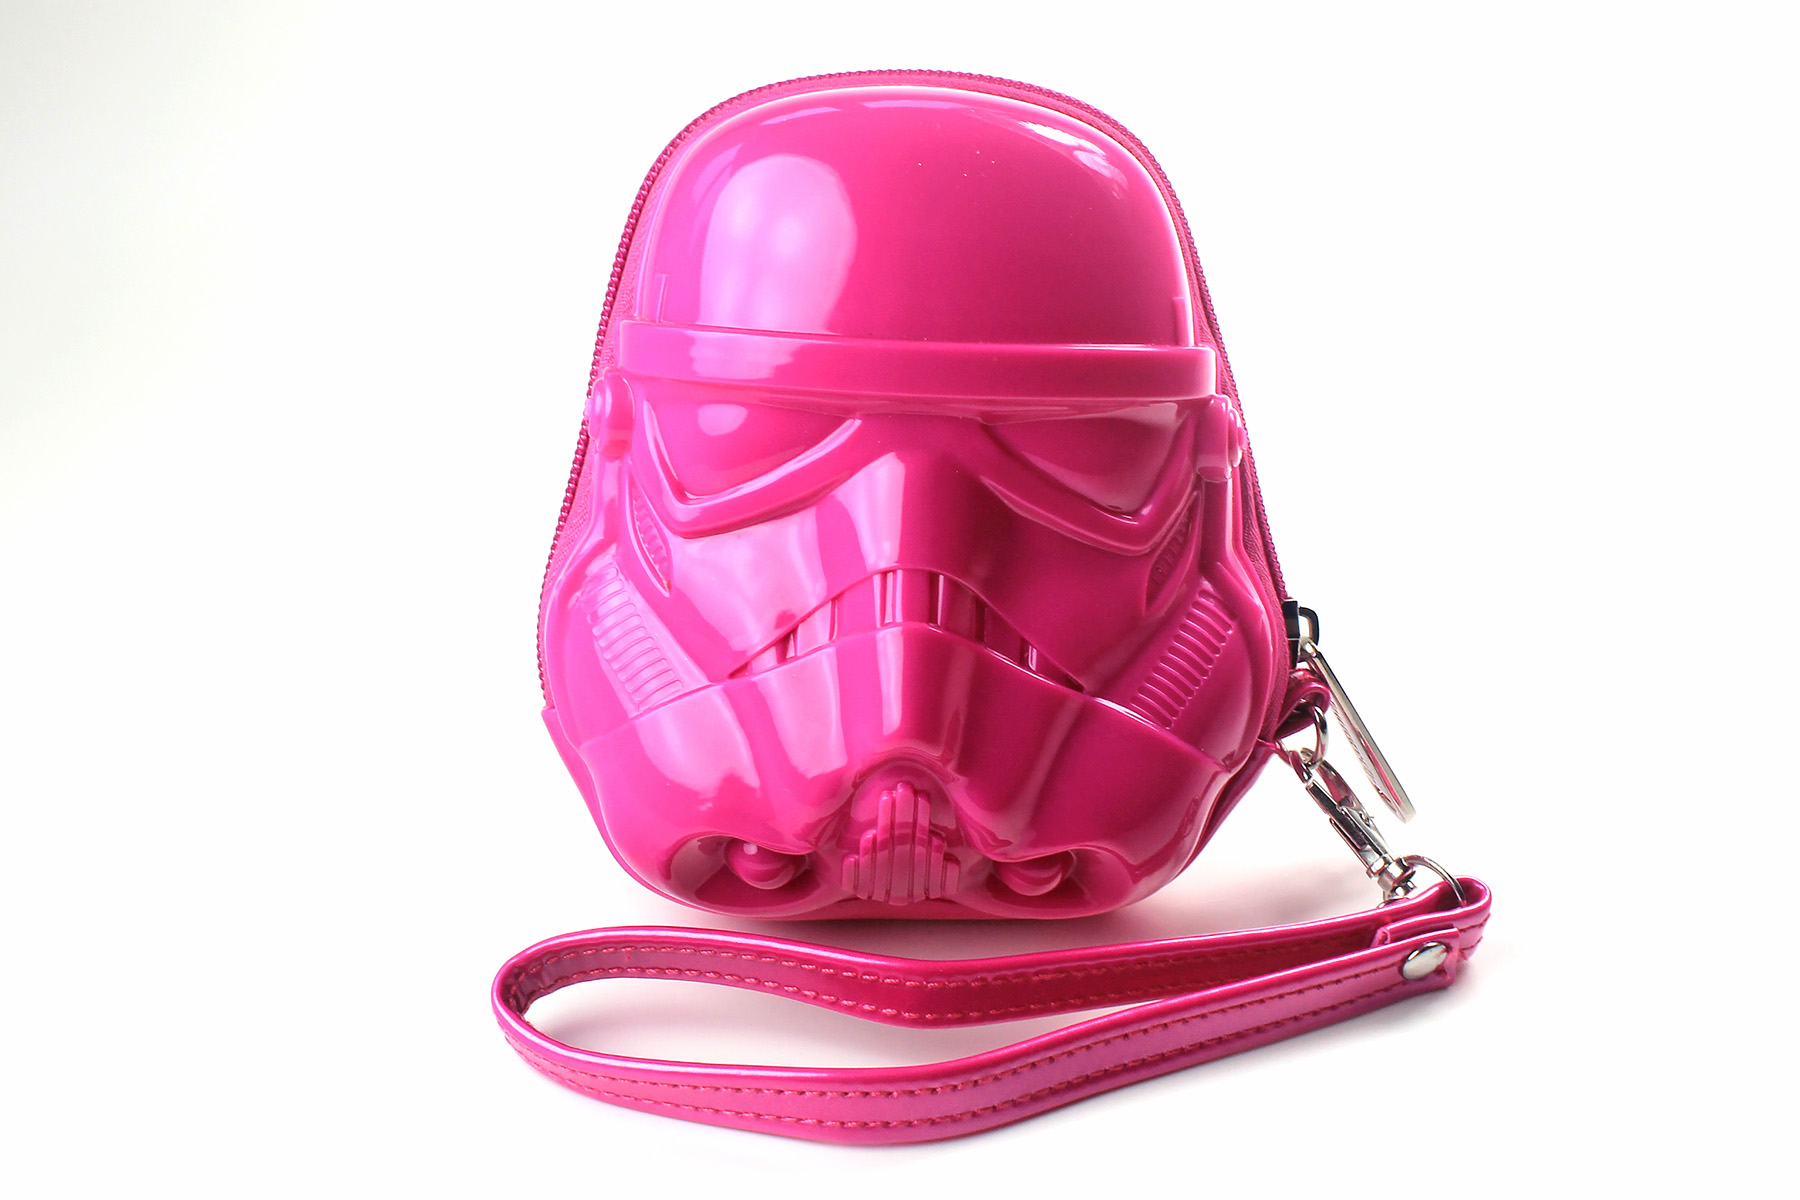 Loungefly x Star Wars SDCC exclusive Stormtrooper 3D wristlet